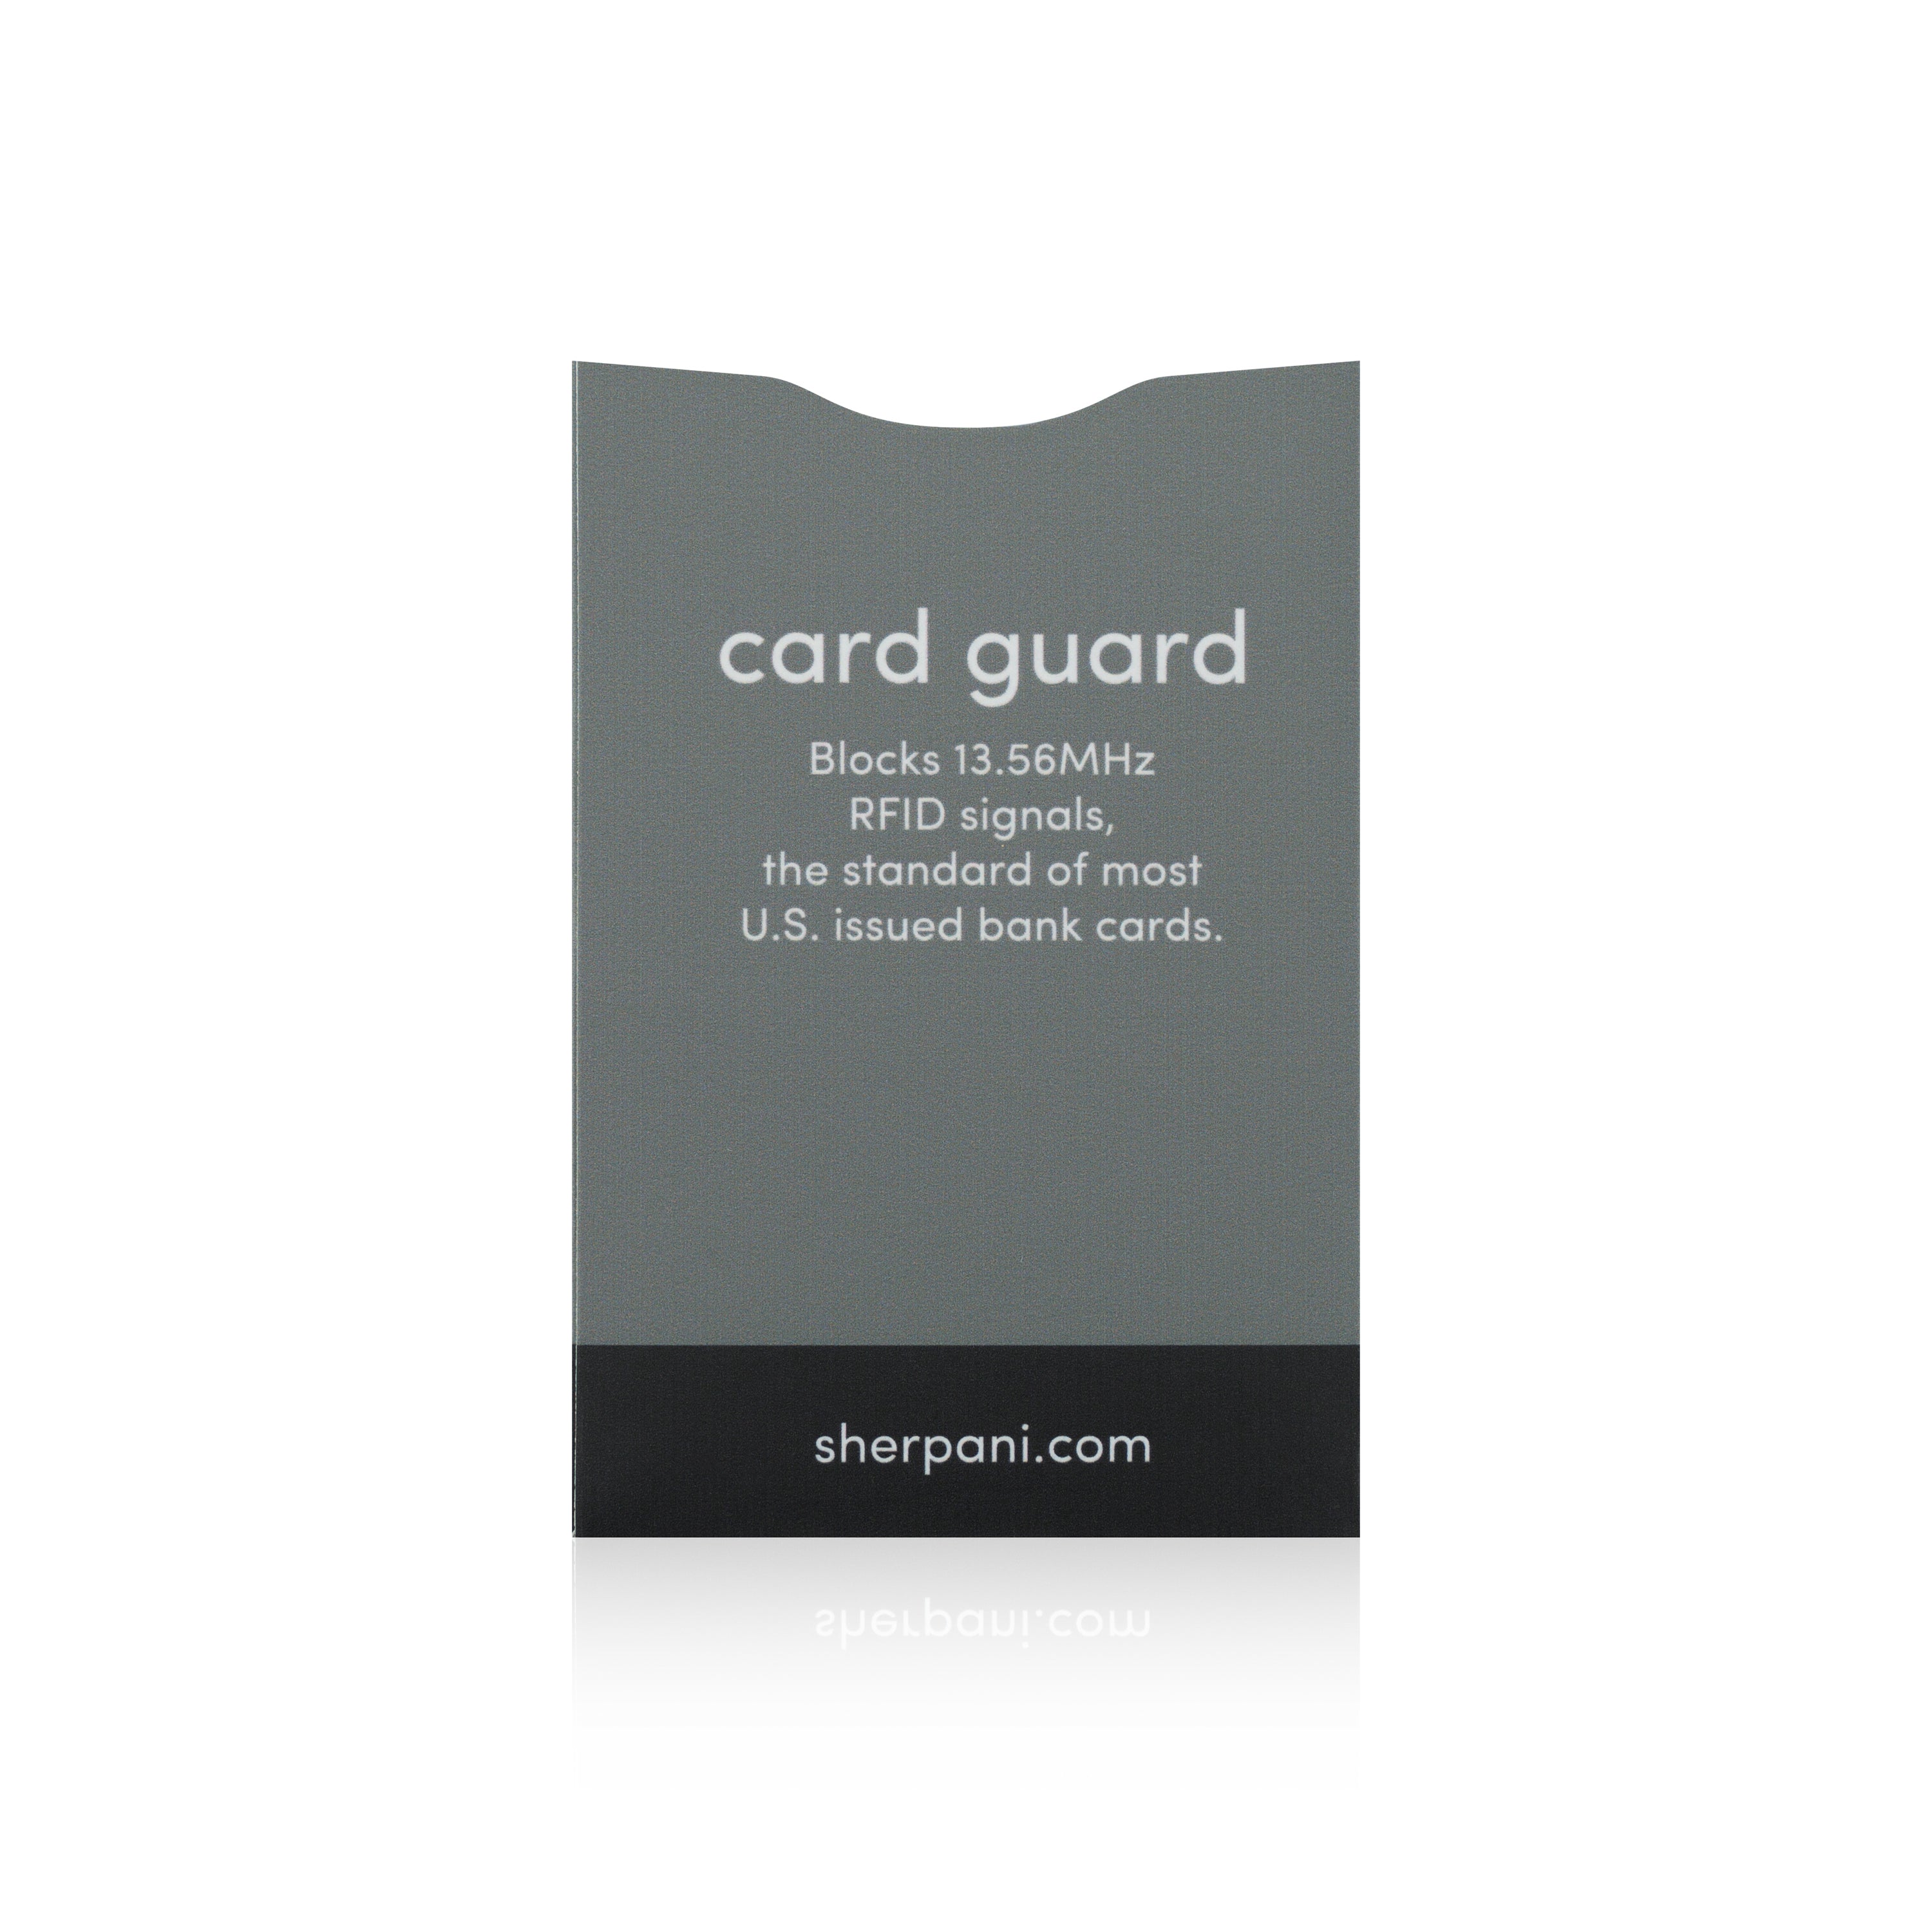 Back view of card guard in Juniper. The back reads "Blocks 13.56MHz RFID signals, the standard of most U.S. issued bank cards."